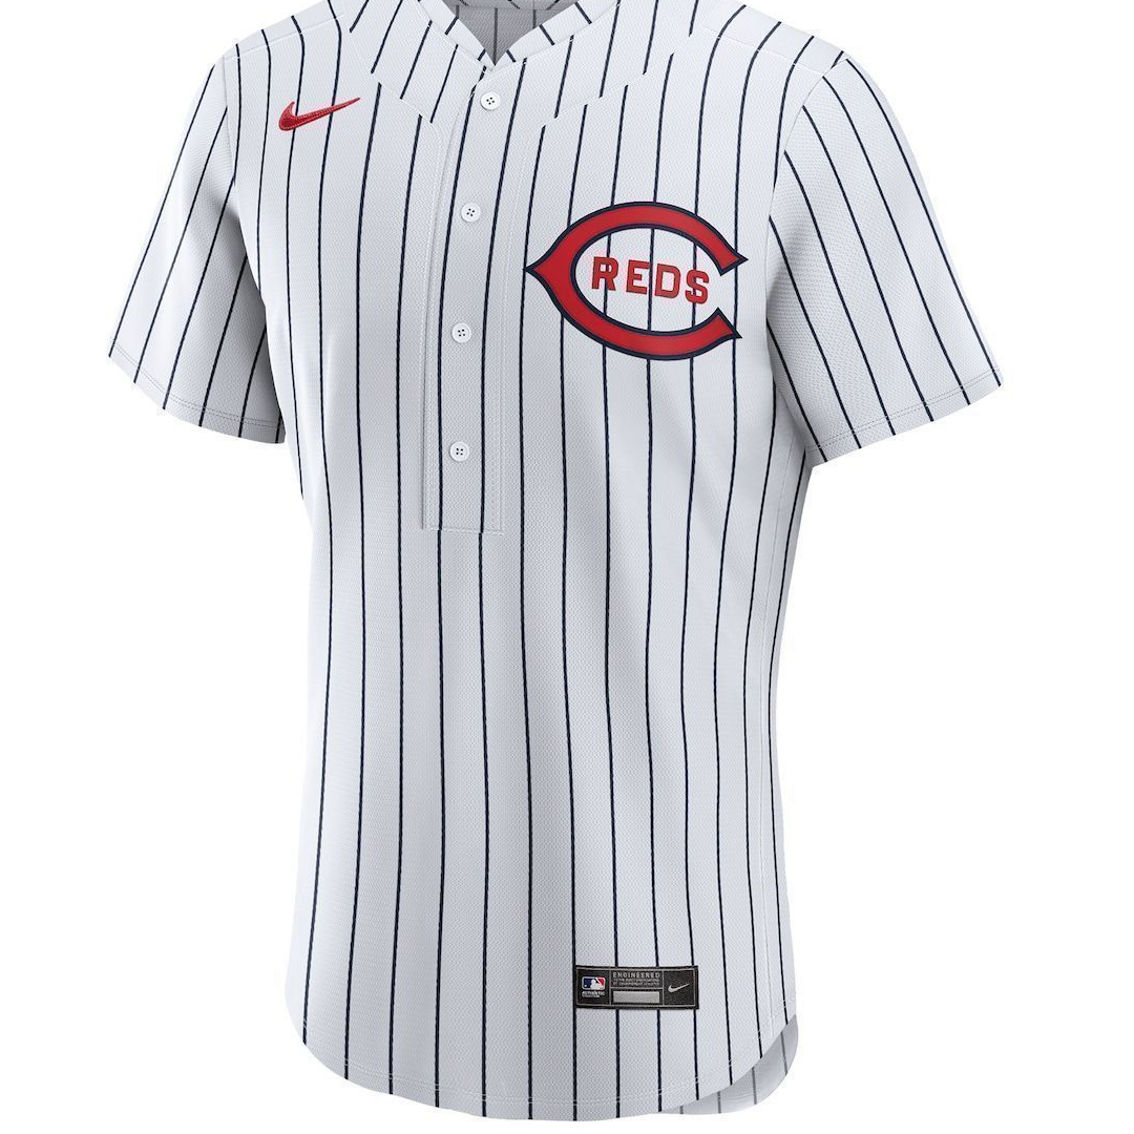 Men's Nike White Cincinnati Reds 2022 MLB at Field of Dreams Game Authentic Team Jersey - Image 3 of 4